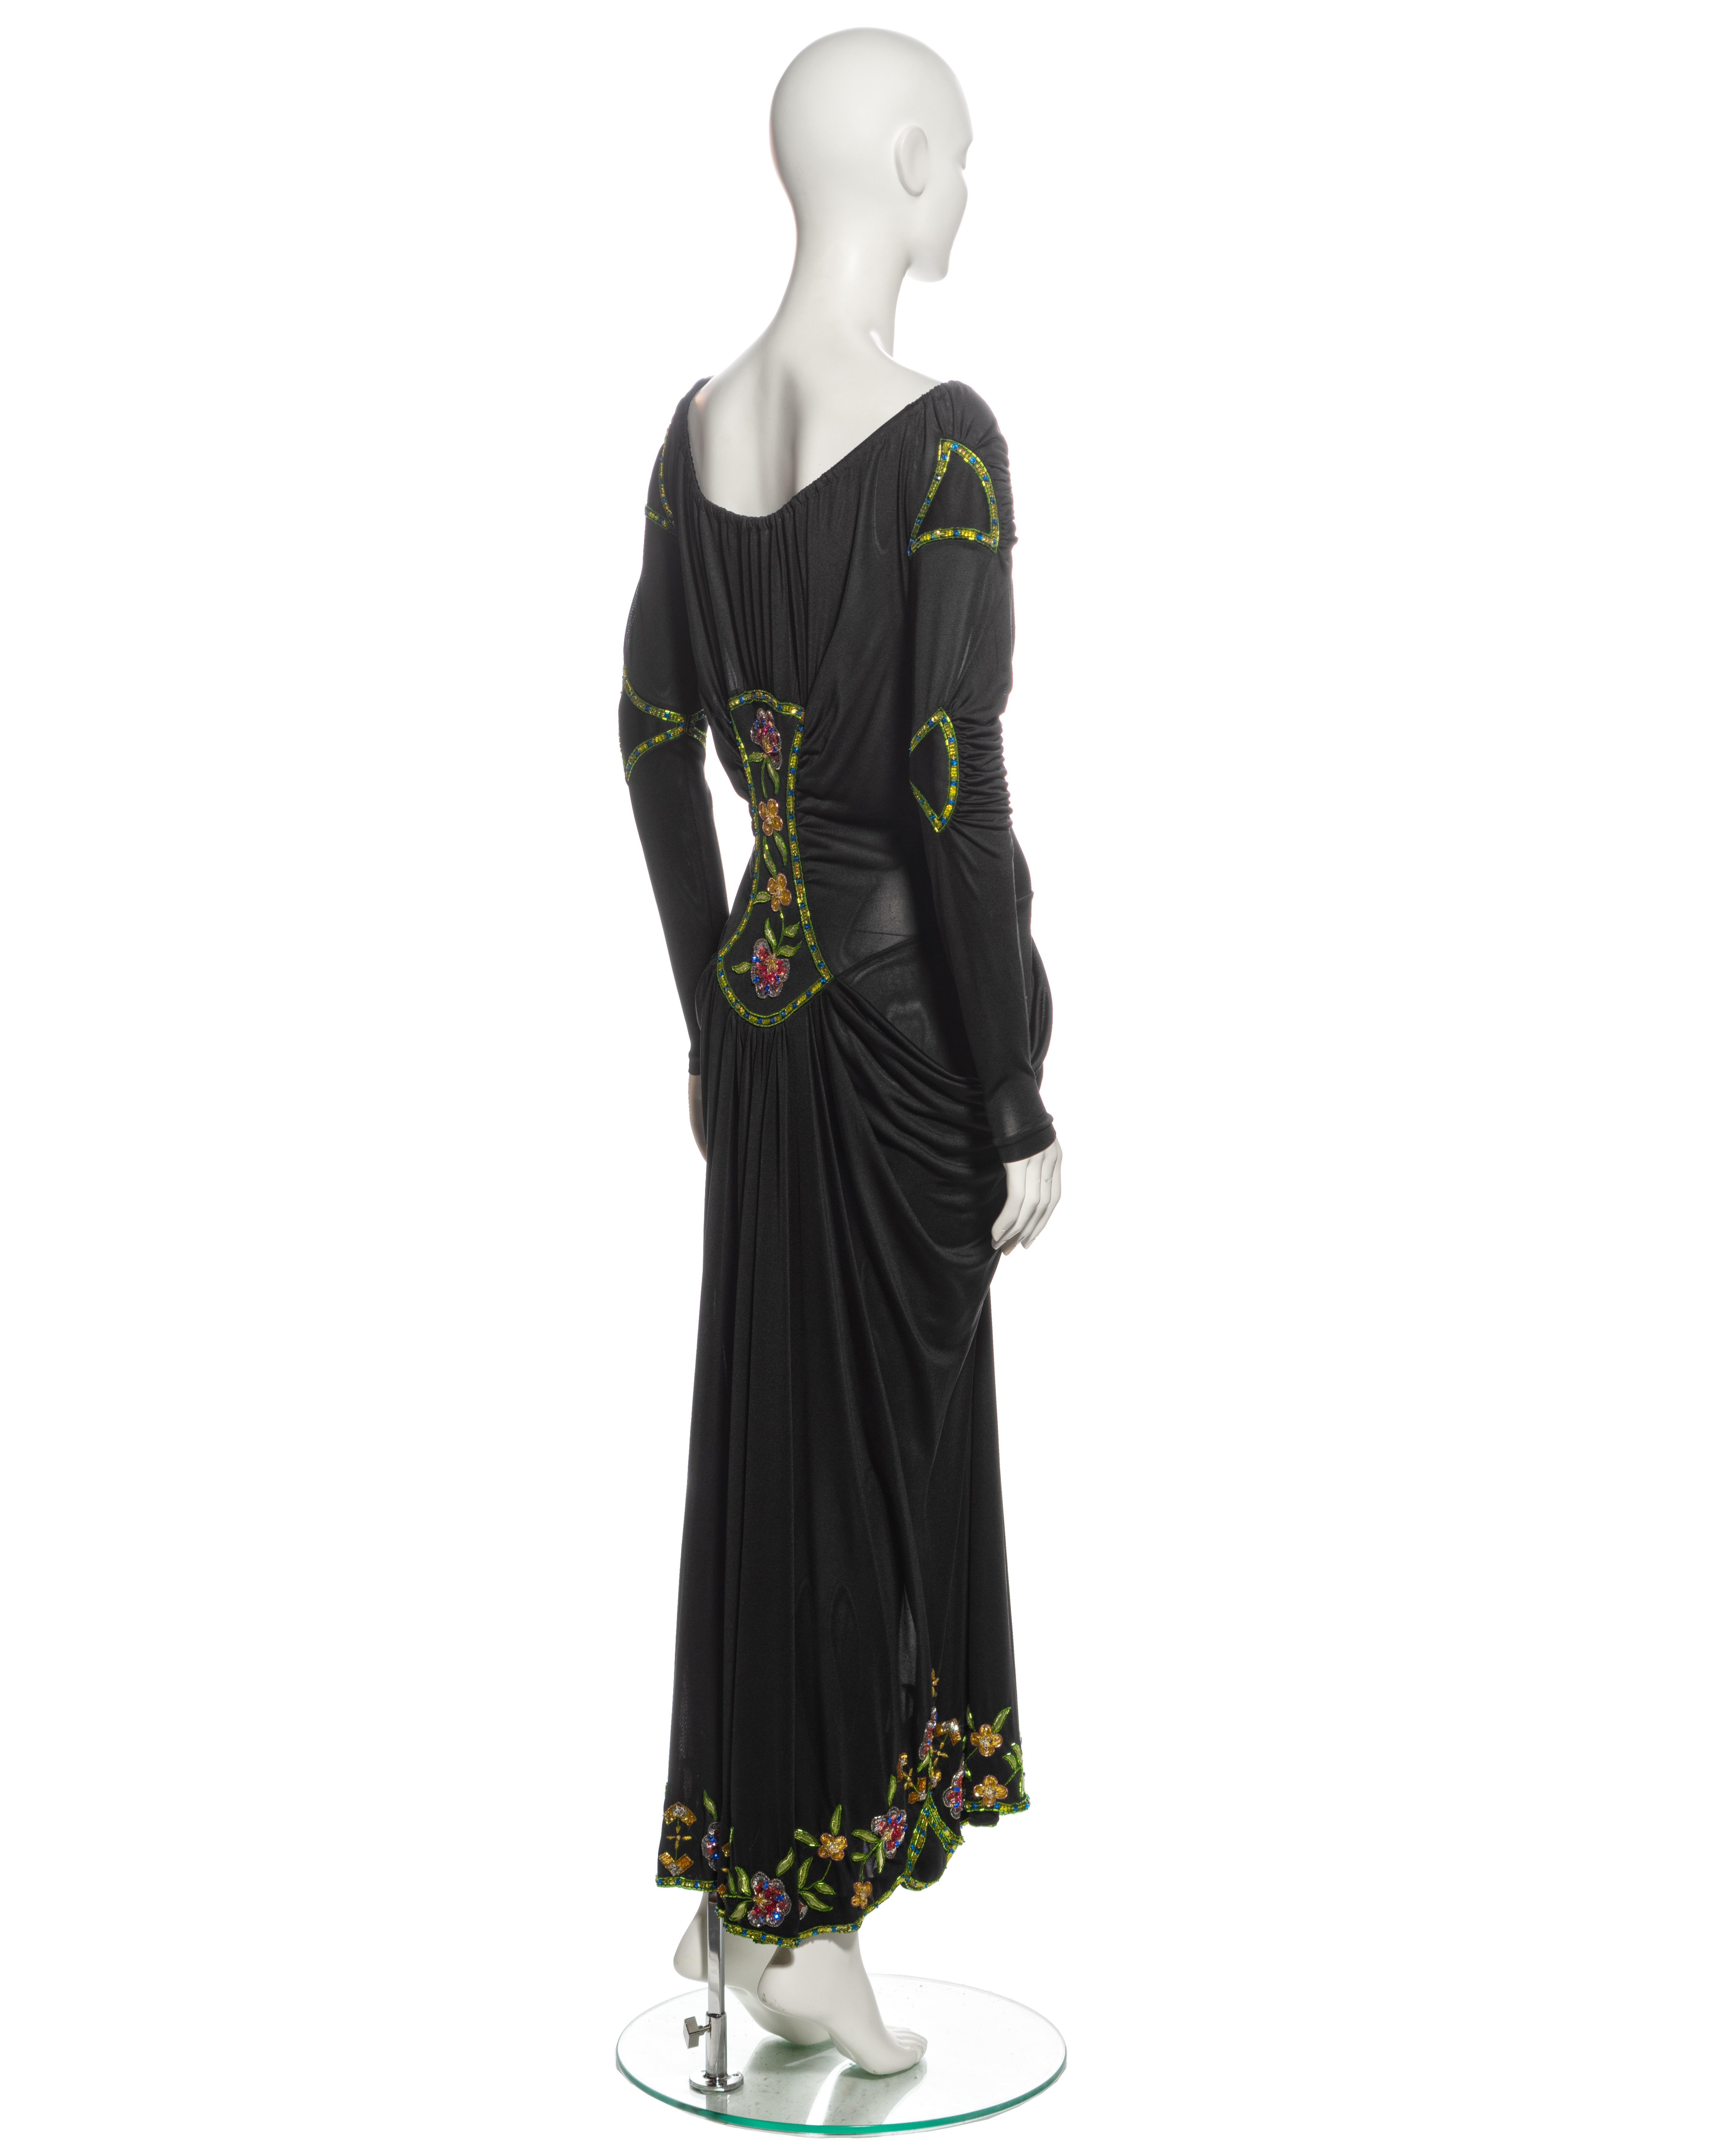 Christian Dior by John Galliano Black Viscose Embellished Draped Dress, ss 2002 For Sale 8